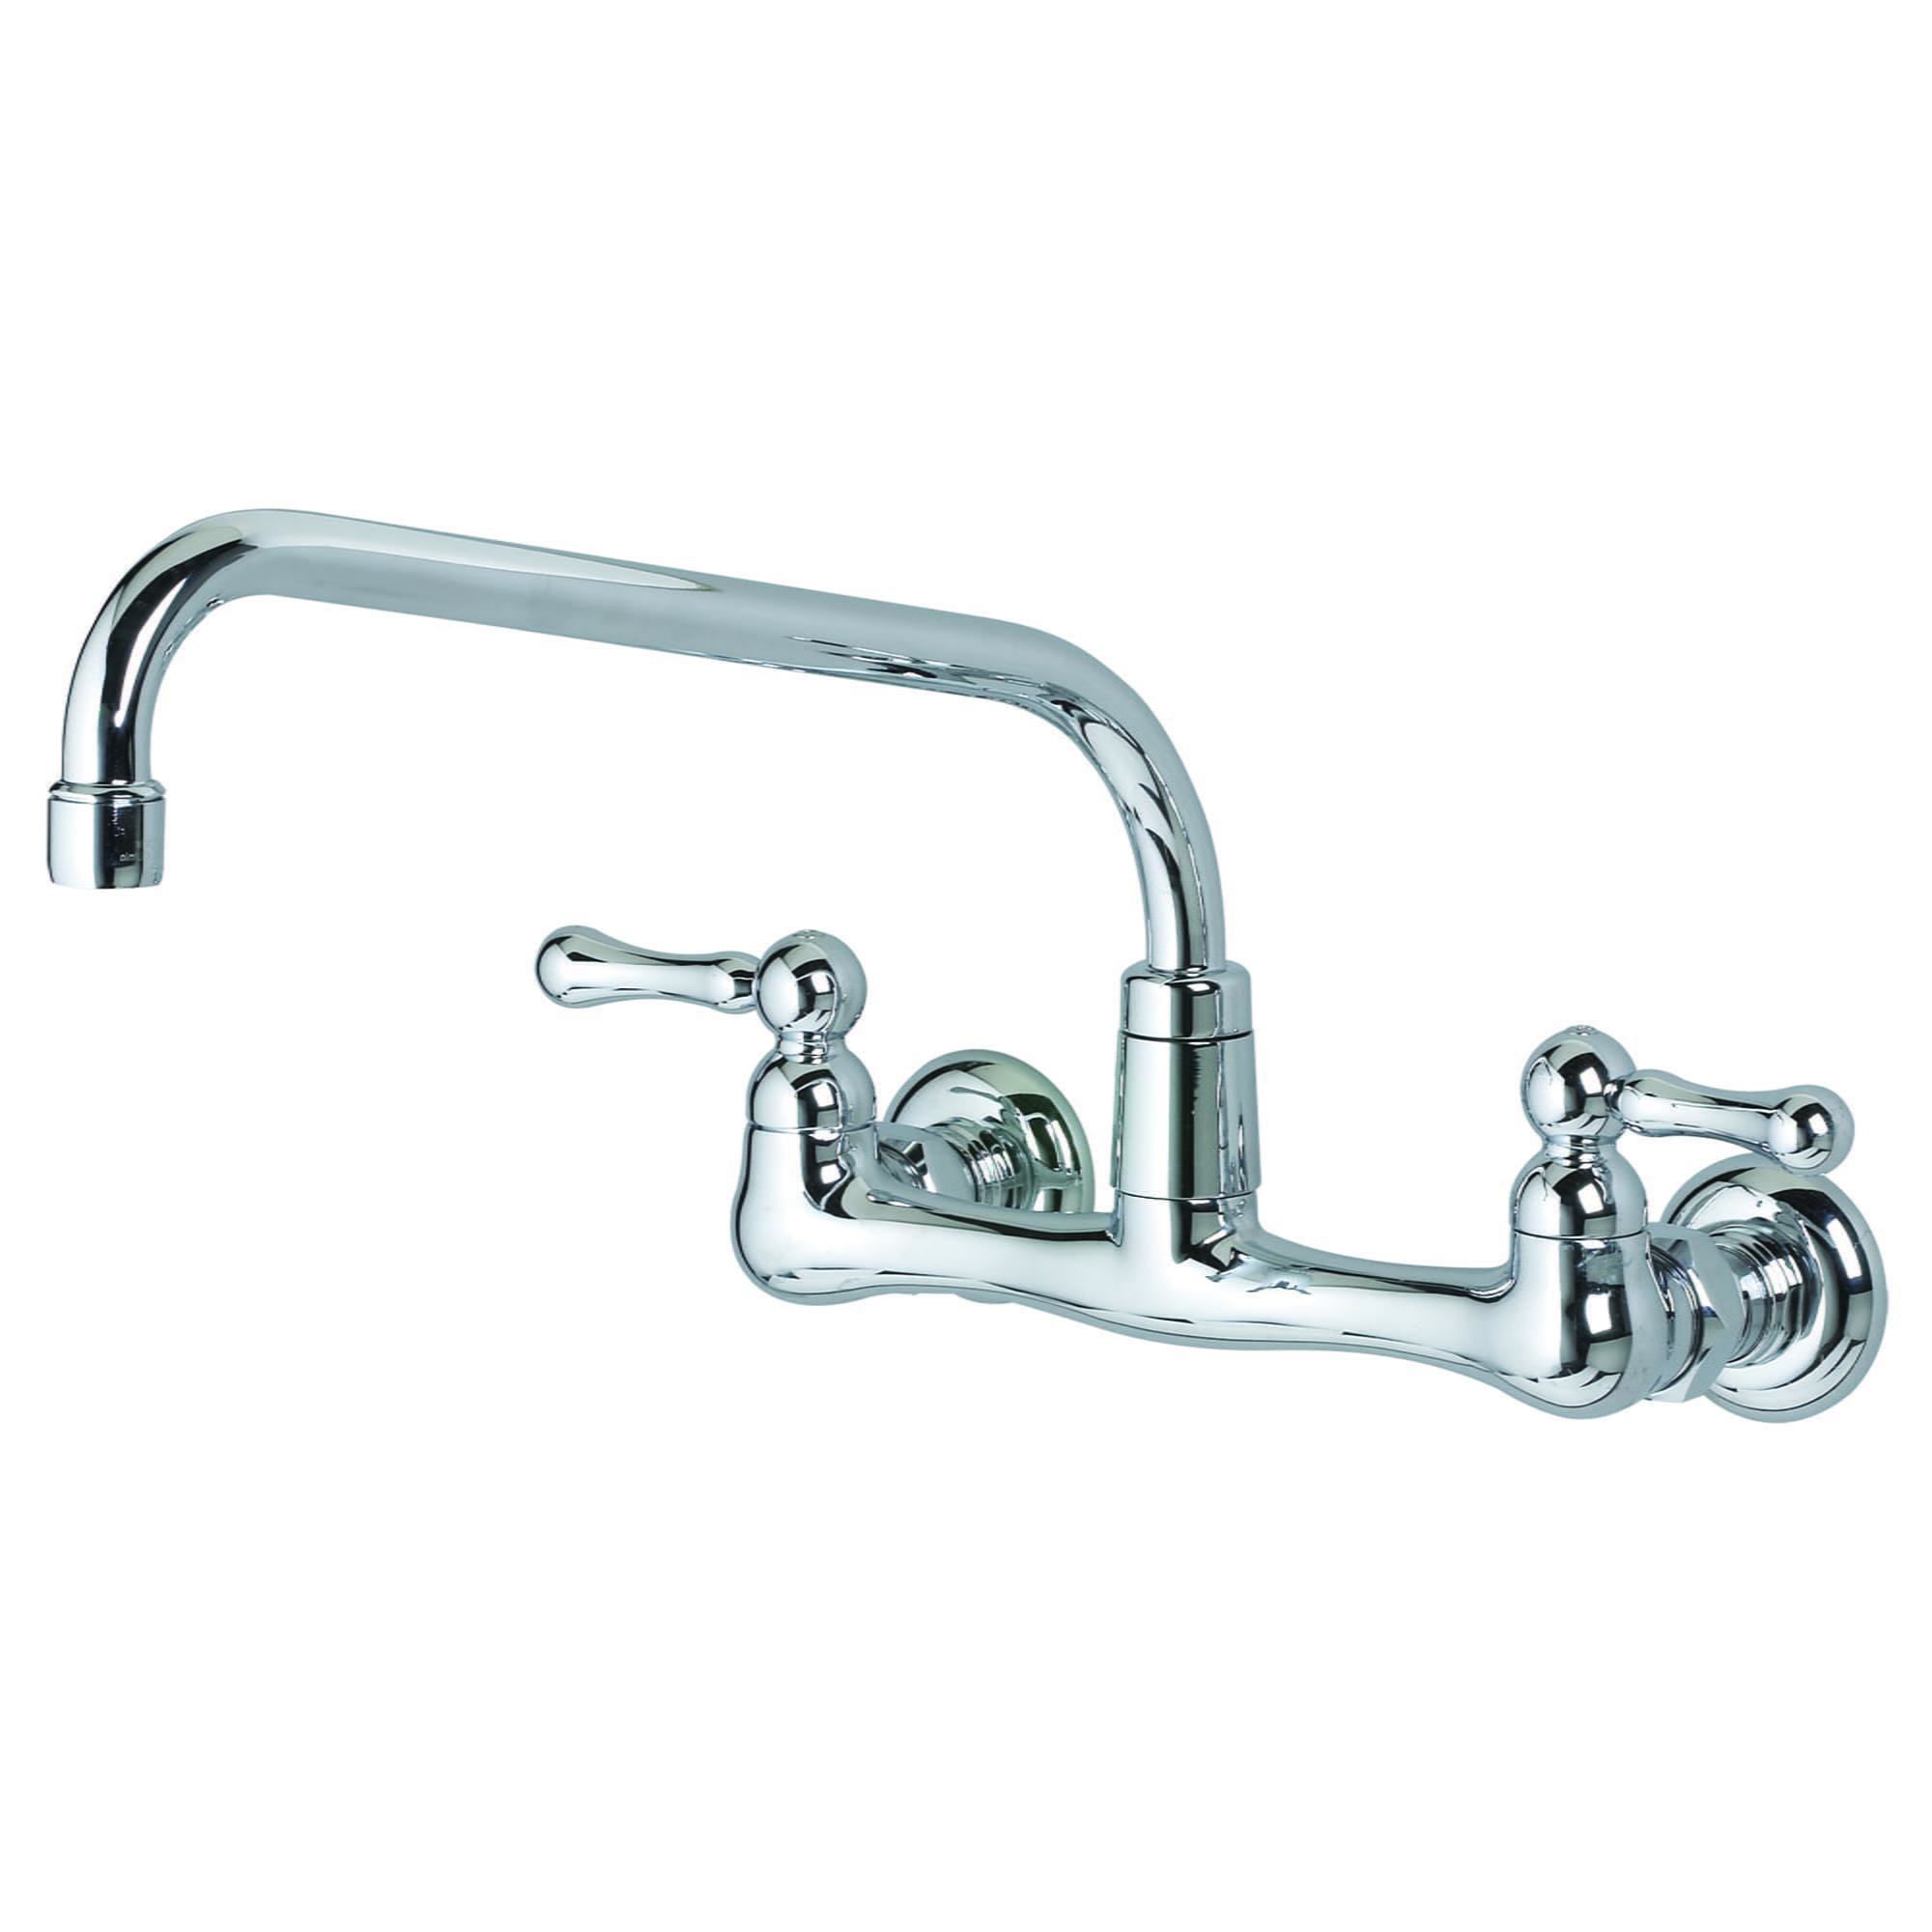 Heritage® Wall Mount Faucet With 8-Inch Tubular Brass Swivel Spout With Lever Handles